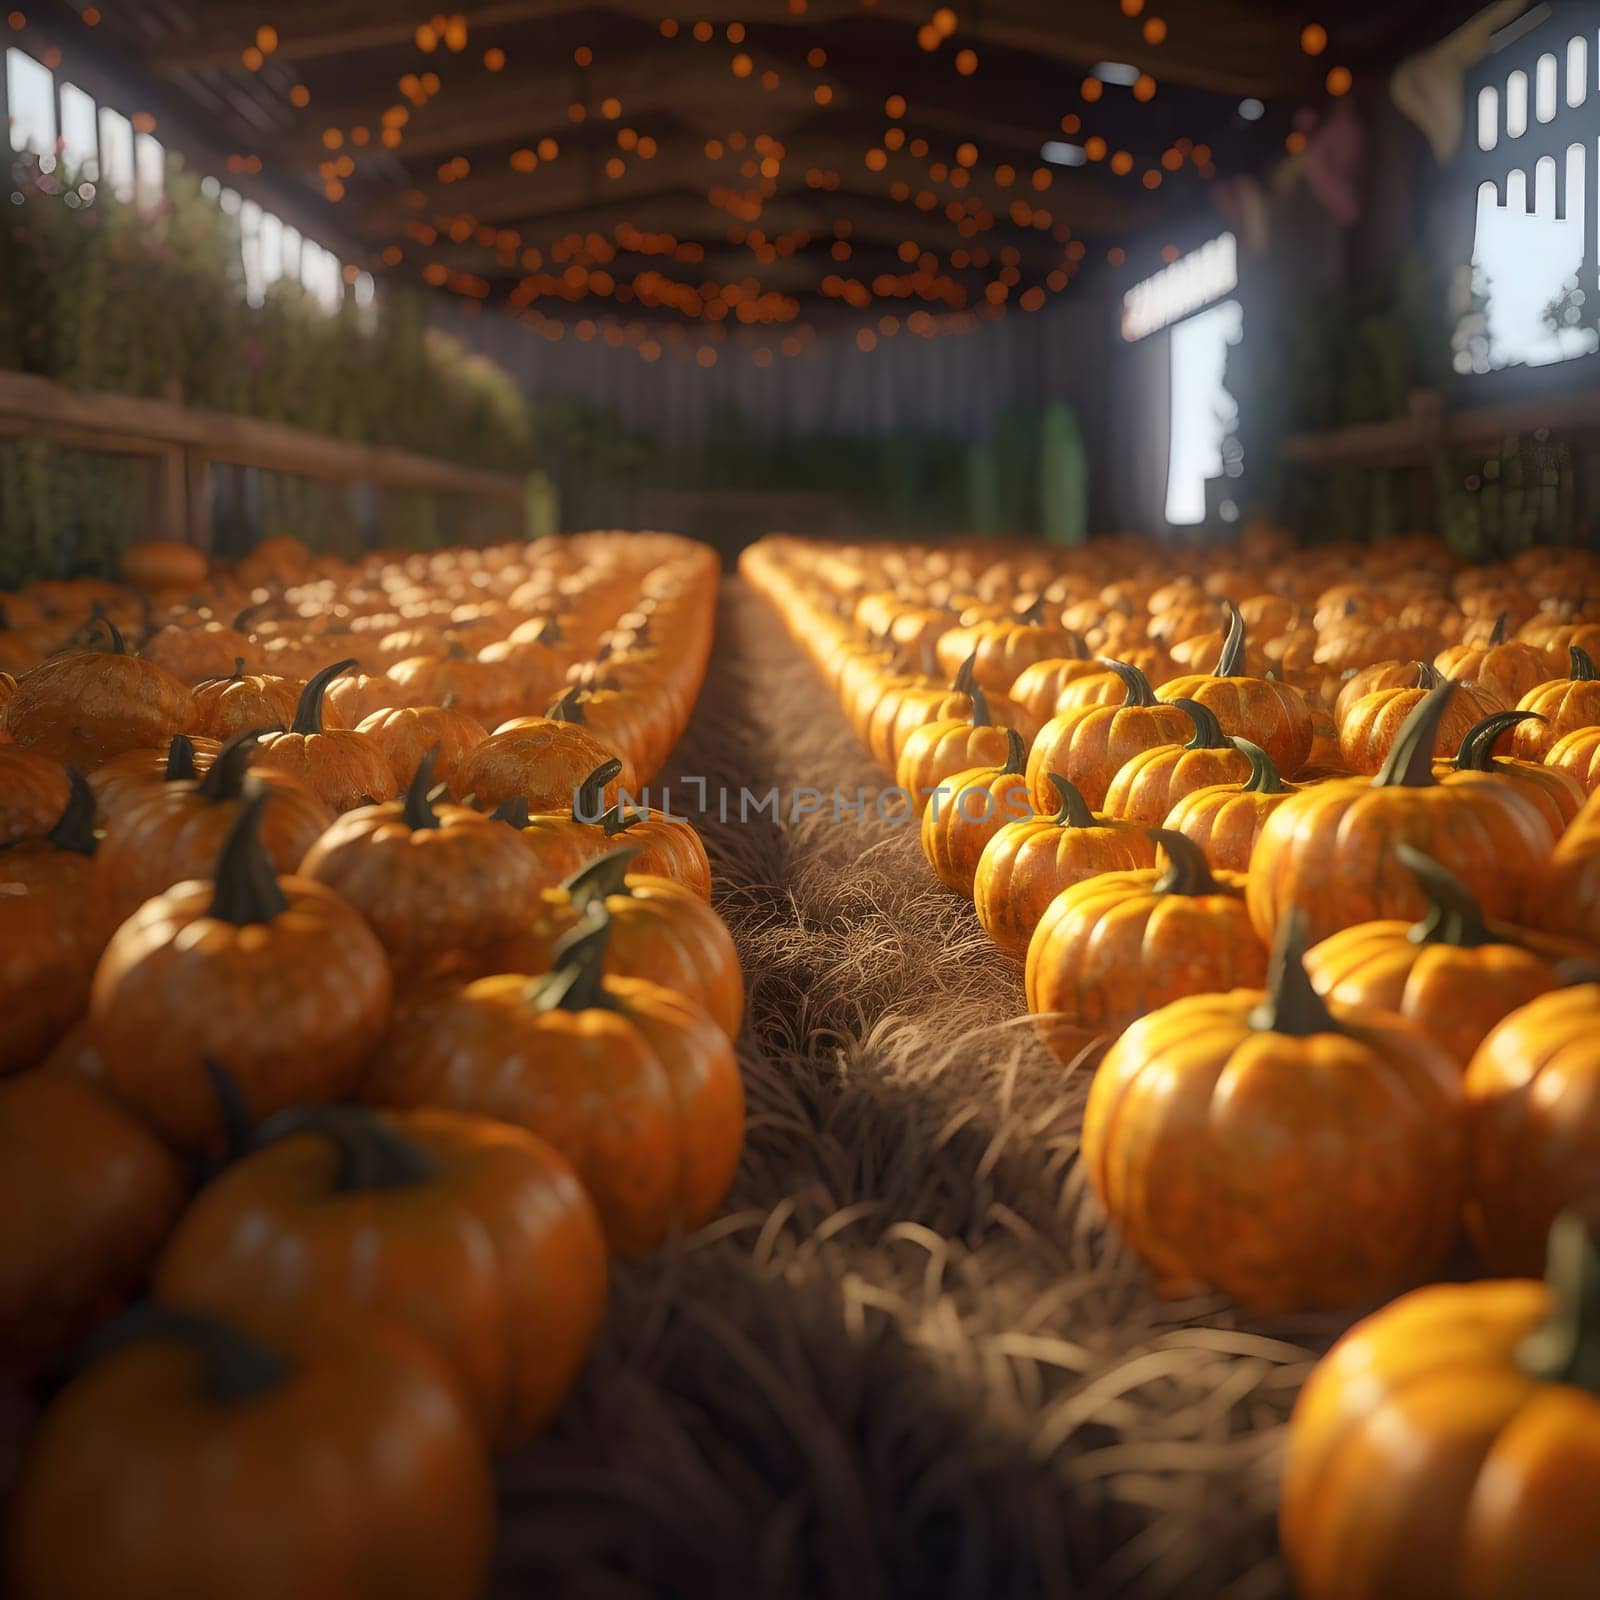 Collected stacked hundreds of orange pumpkins. Pumpkin as a dish of thanksgiving for the harvest. An atmosphere of joy and celebration.